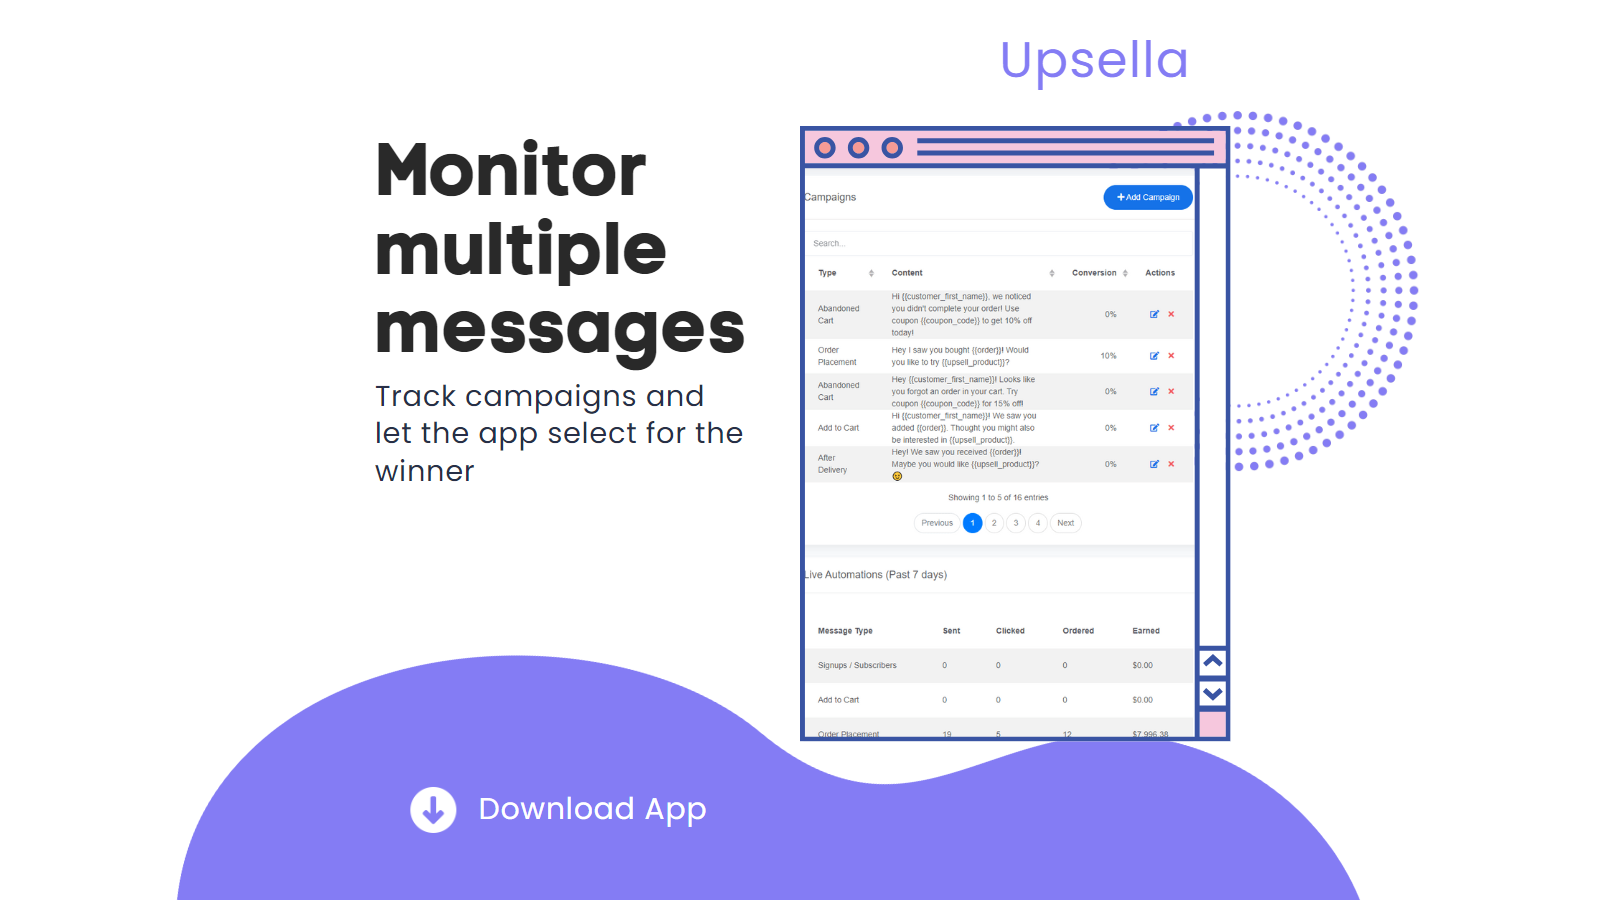 Monitor campaigns - track campaigns and let app select winner